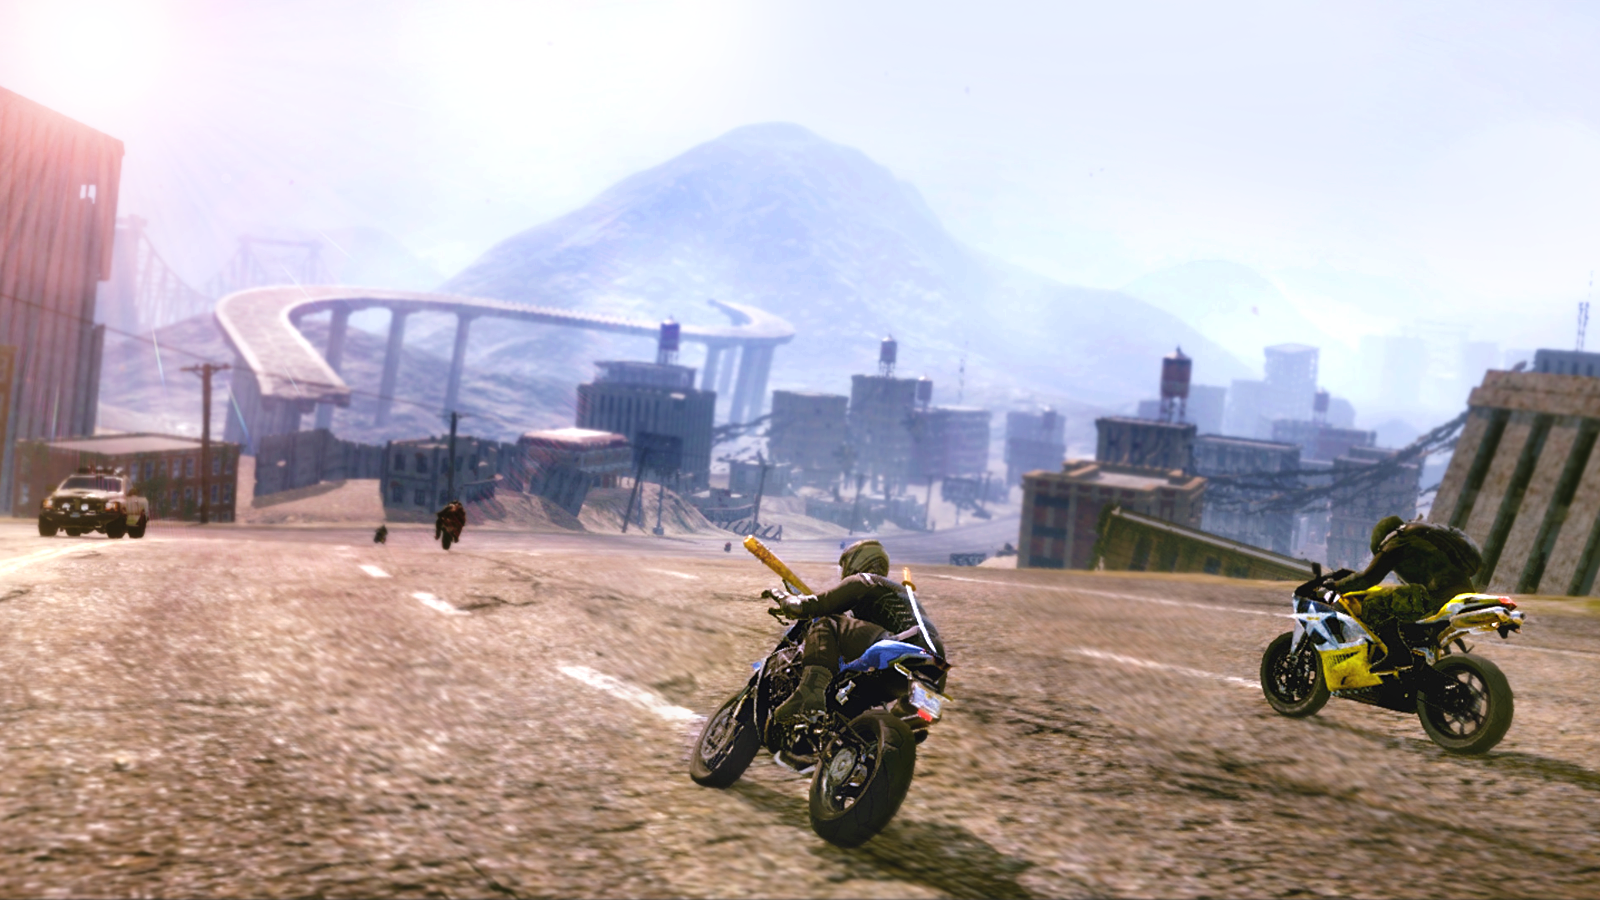 Road Redemption, EQ Games, Pixel Dash Studios, Switch, Nintendo Switch, PS4, PlayStation4, Xbox One, Europe, North America, Price, Pre-order, Features, Screenshots, Physical Release, Retail Versions